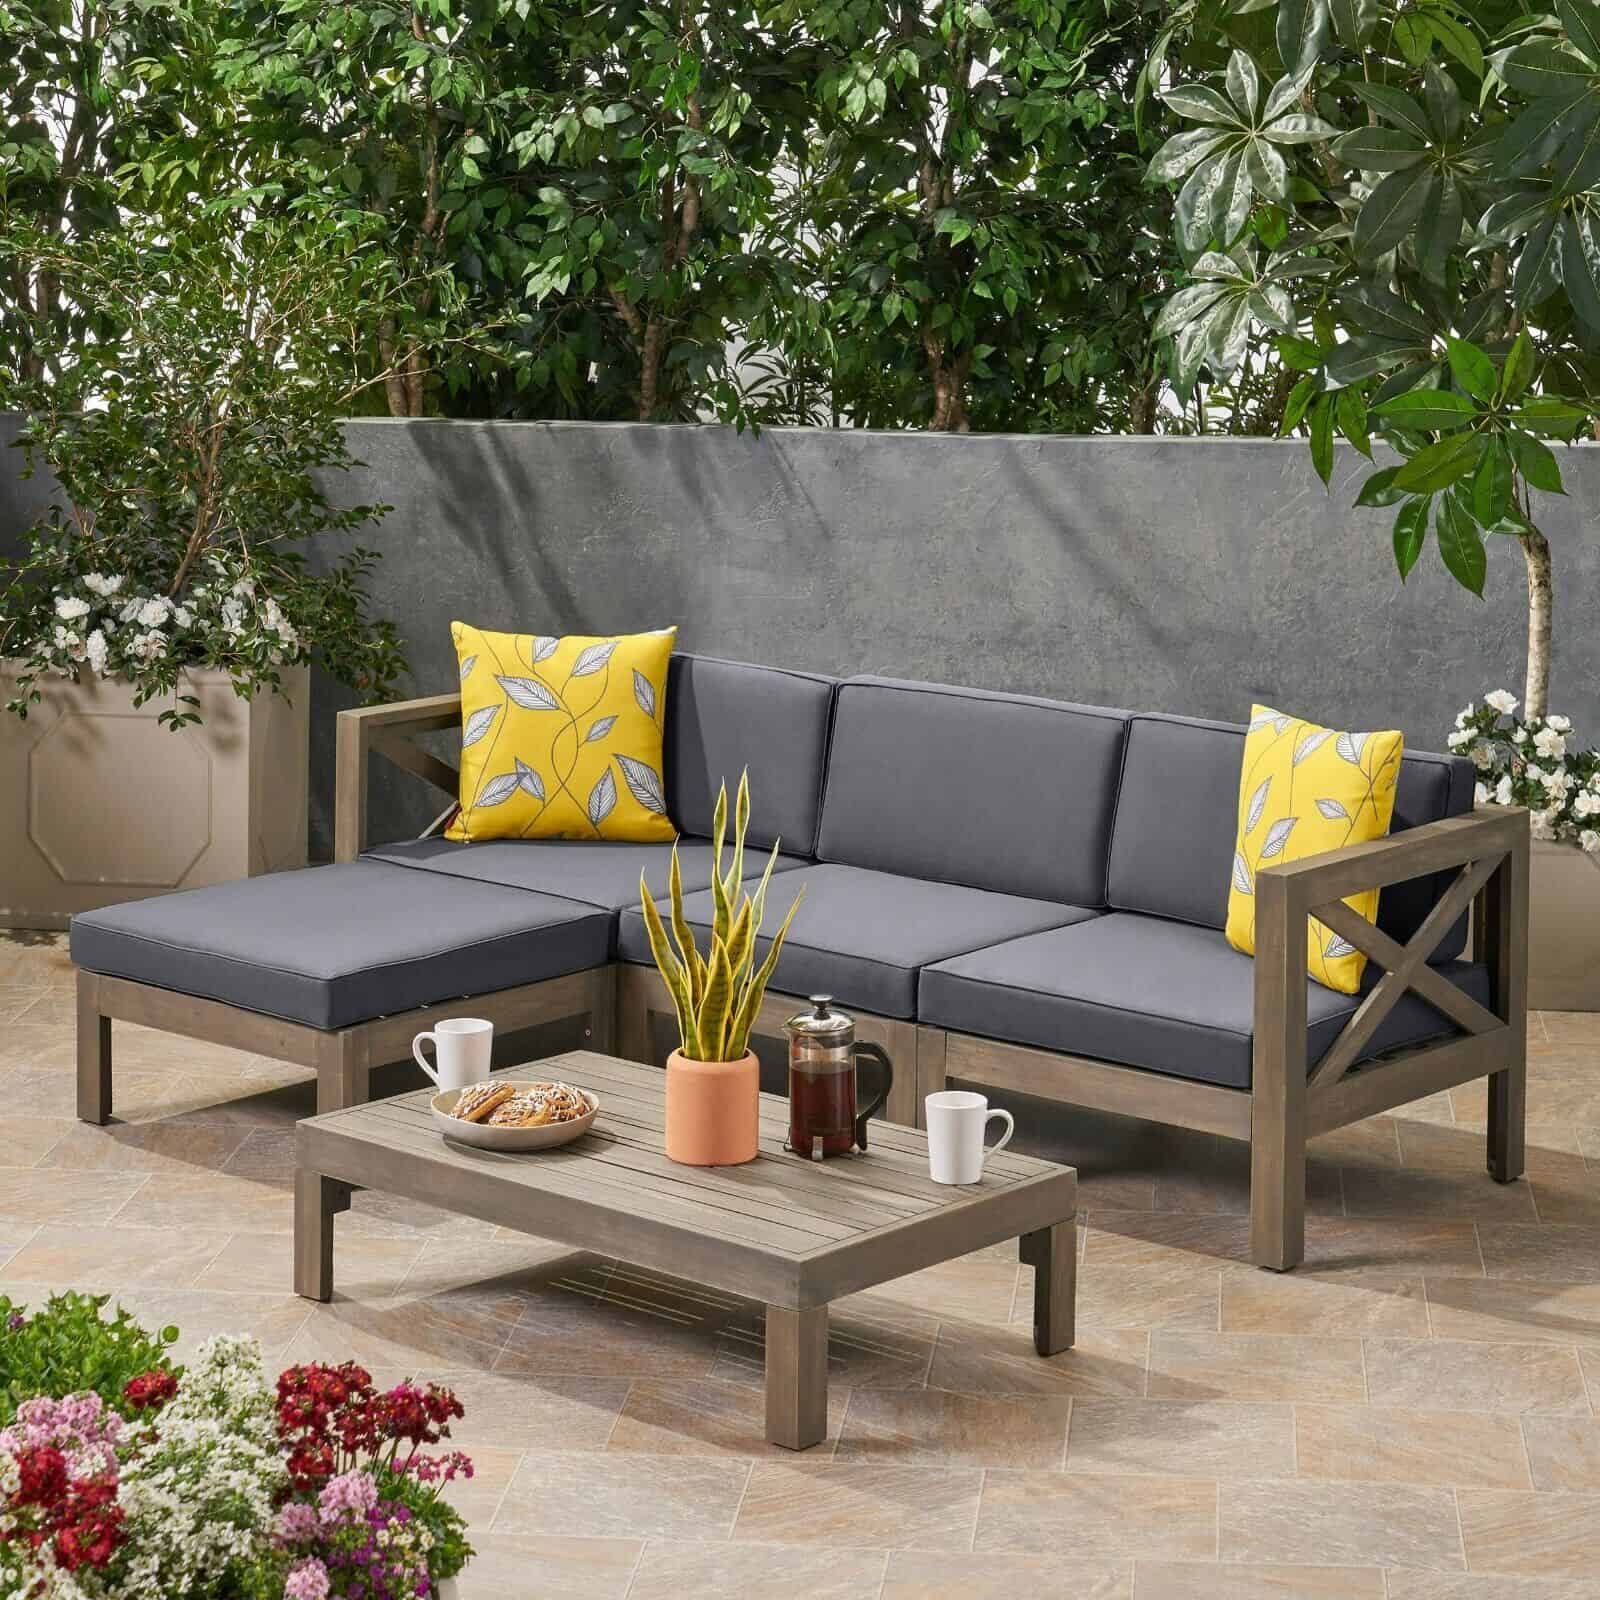 A grey sectional sofa set with yellow pillows on a patio.